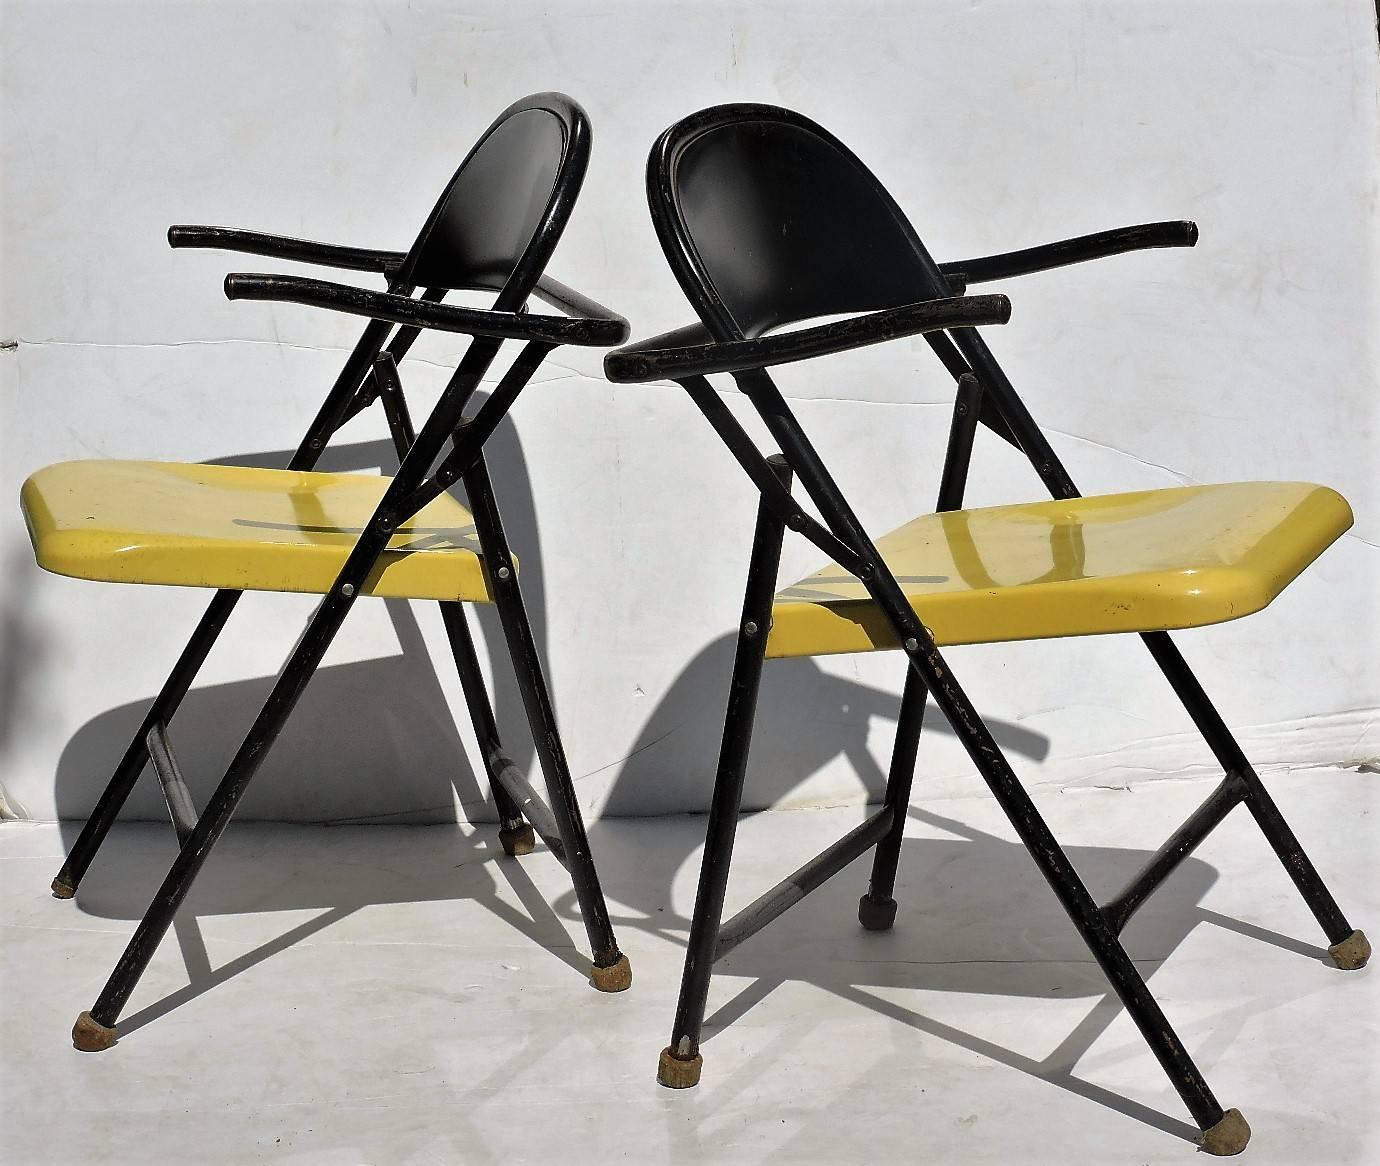 A pair of Bauhaus style sleek grasshopper form metal folding chairs in original black and yellow enameled painted surface with a beautifully angled architectonic sculptural design, circa 1950s. These will fold for parcel shipping, see image 8.